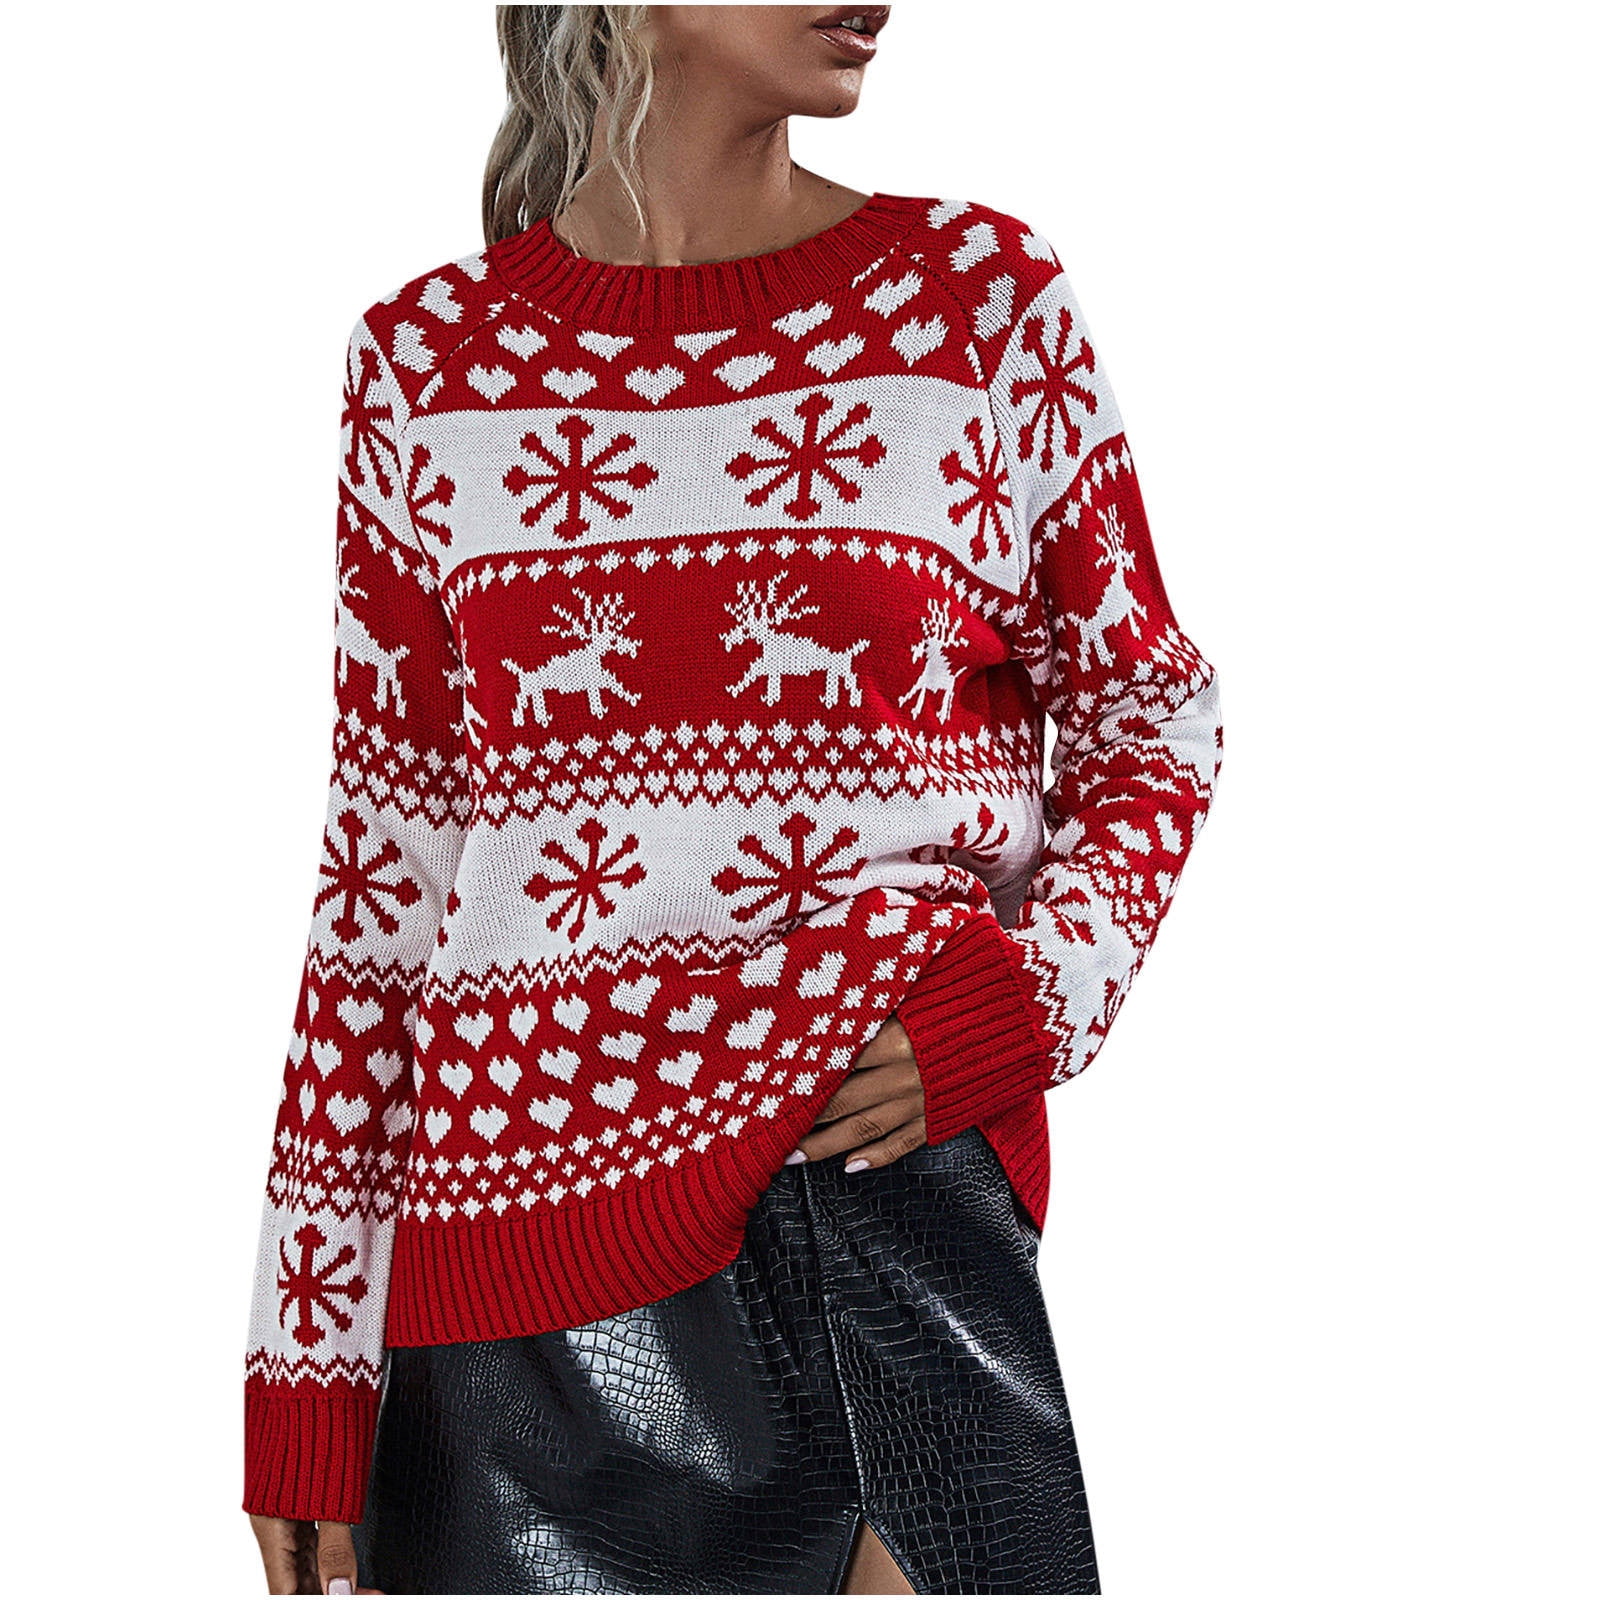 Hfyihgf Women's Ugly Christmas Sweaters Snowflake Reindeer Long Sleeve  Holiday Knit Xmas Sweater Pullover Tops（Red,L) 